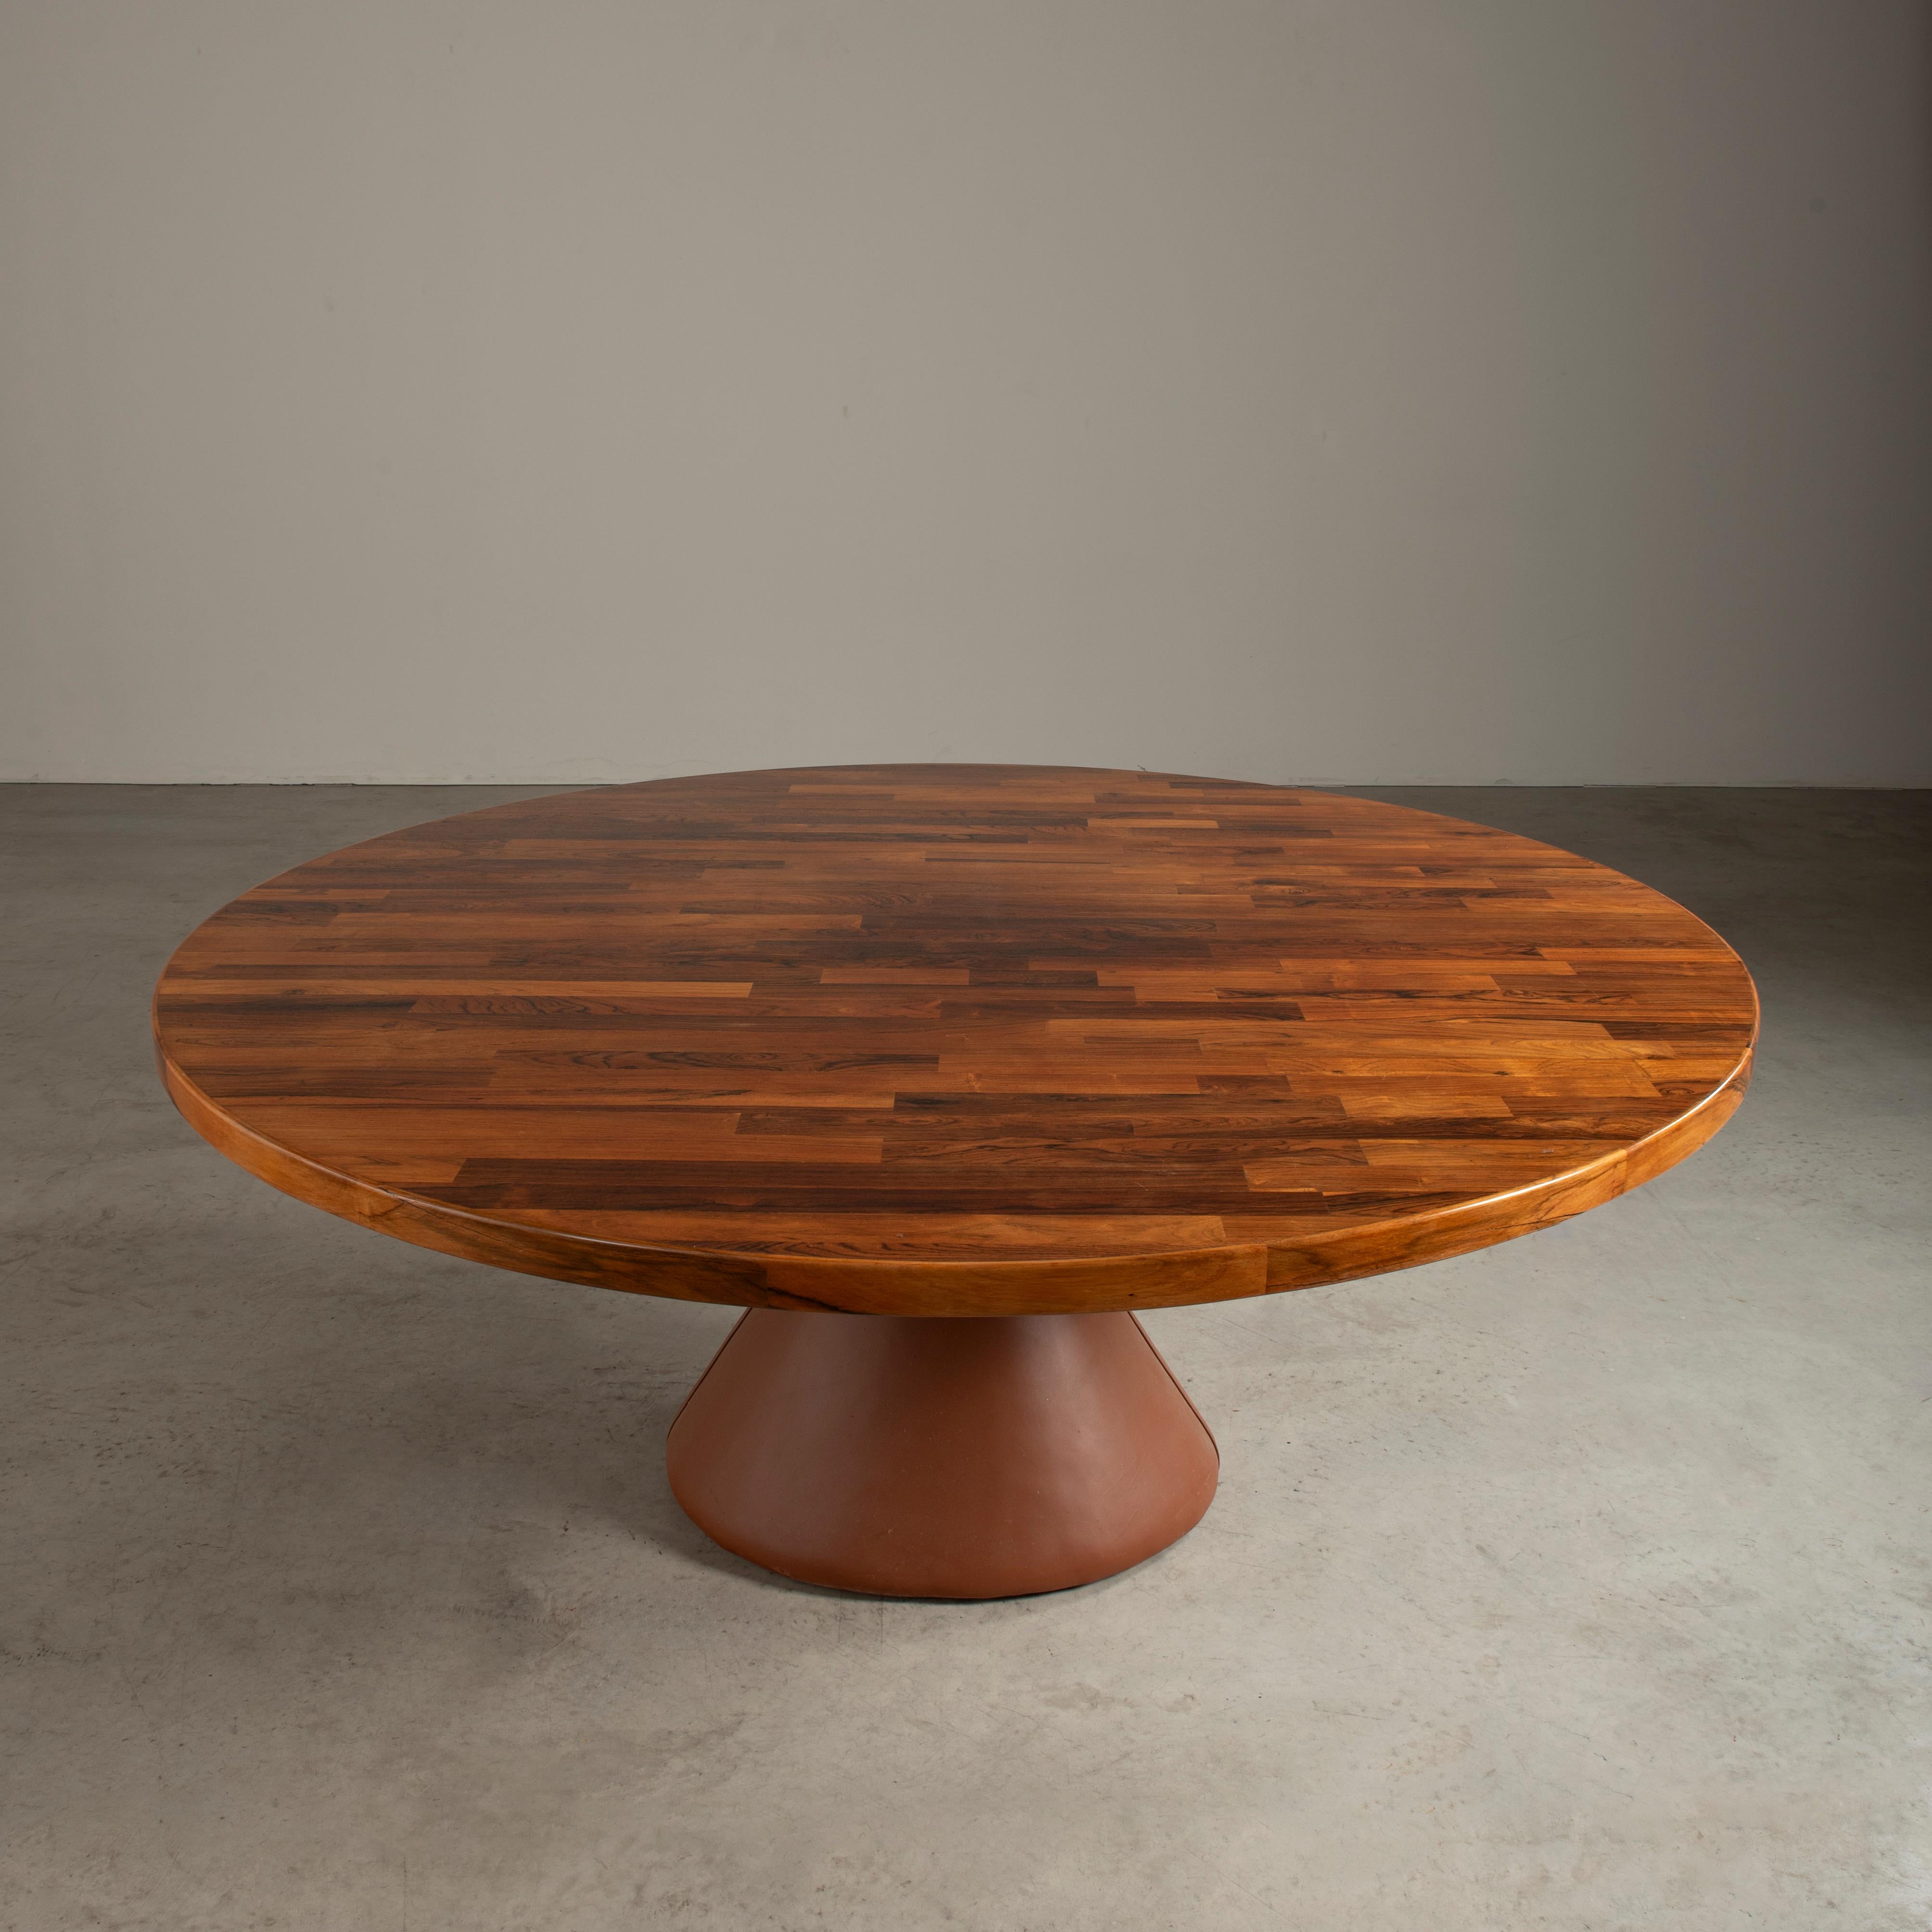 'Guarujá' Dining Table, by Jorge Zalszupin, Brazilian Modern Design In Good Condition For Sale In Sao Paulo, SP